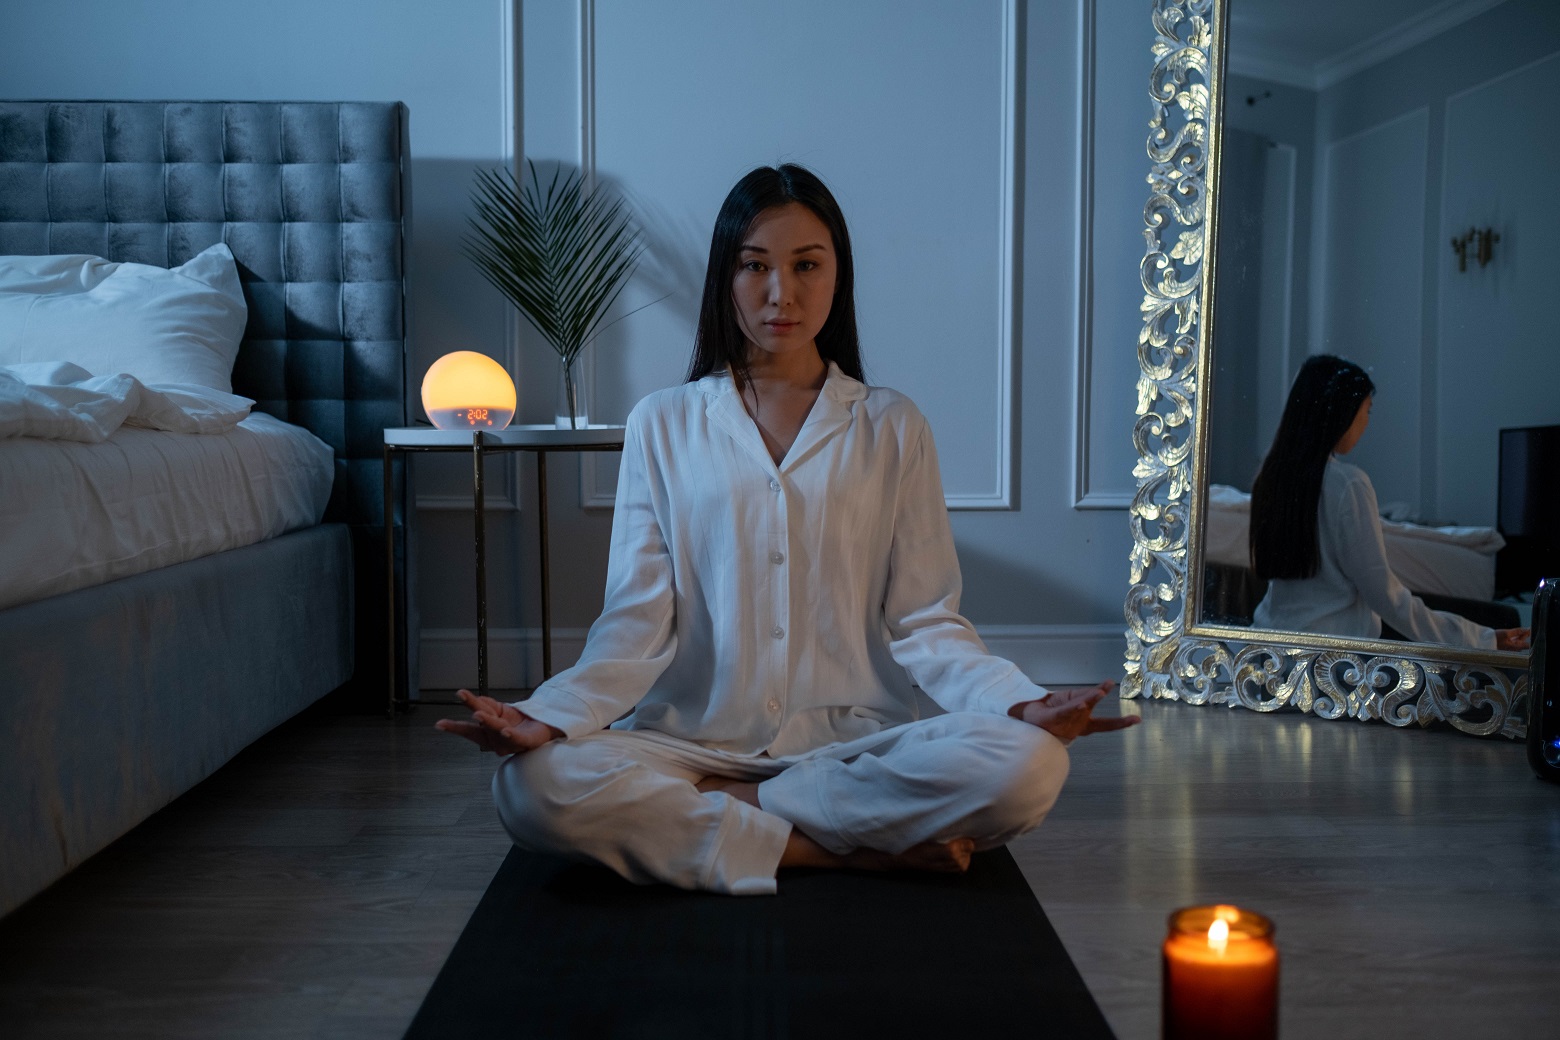 How to Meditate Without Falling Asleep Stay Alert and Reap the Benefits